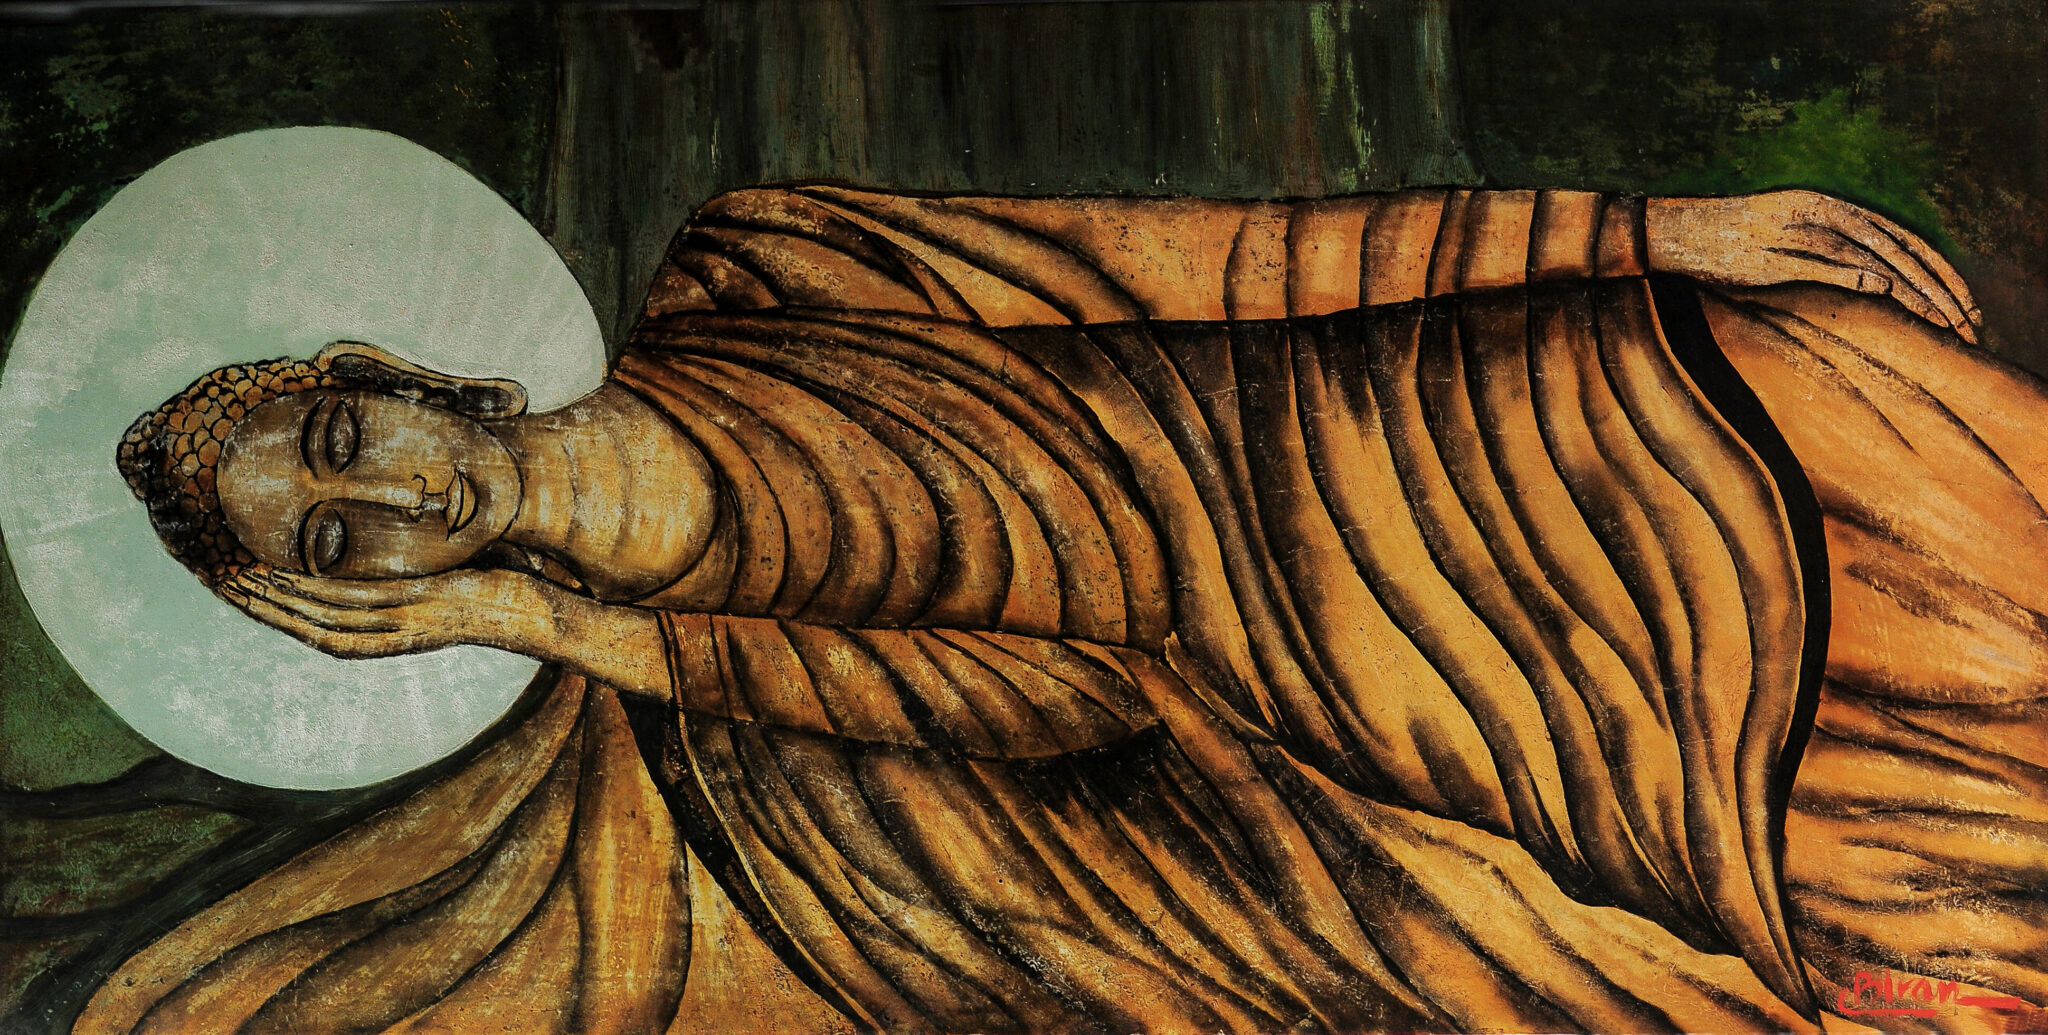 Reclining Buddha | lacquer on panel | 80 x 160 cm. (31 1/2 x 62 63/64 in.)